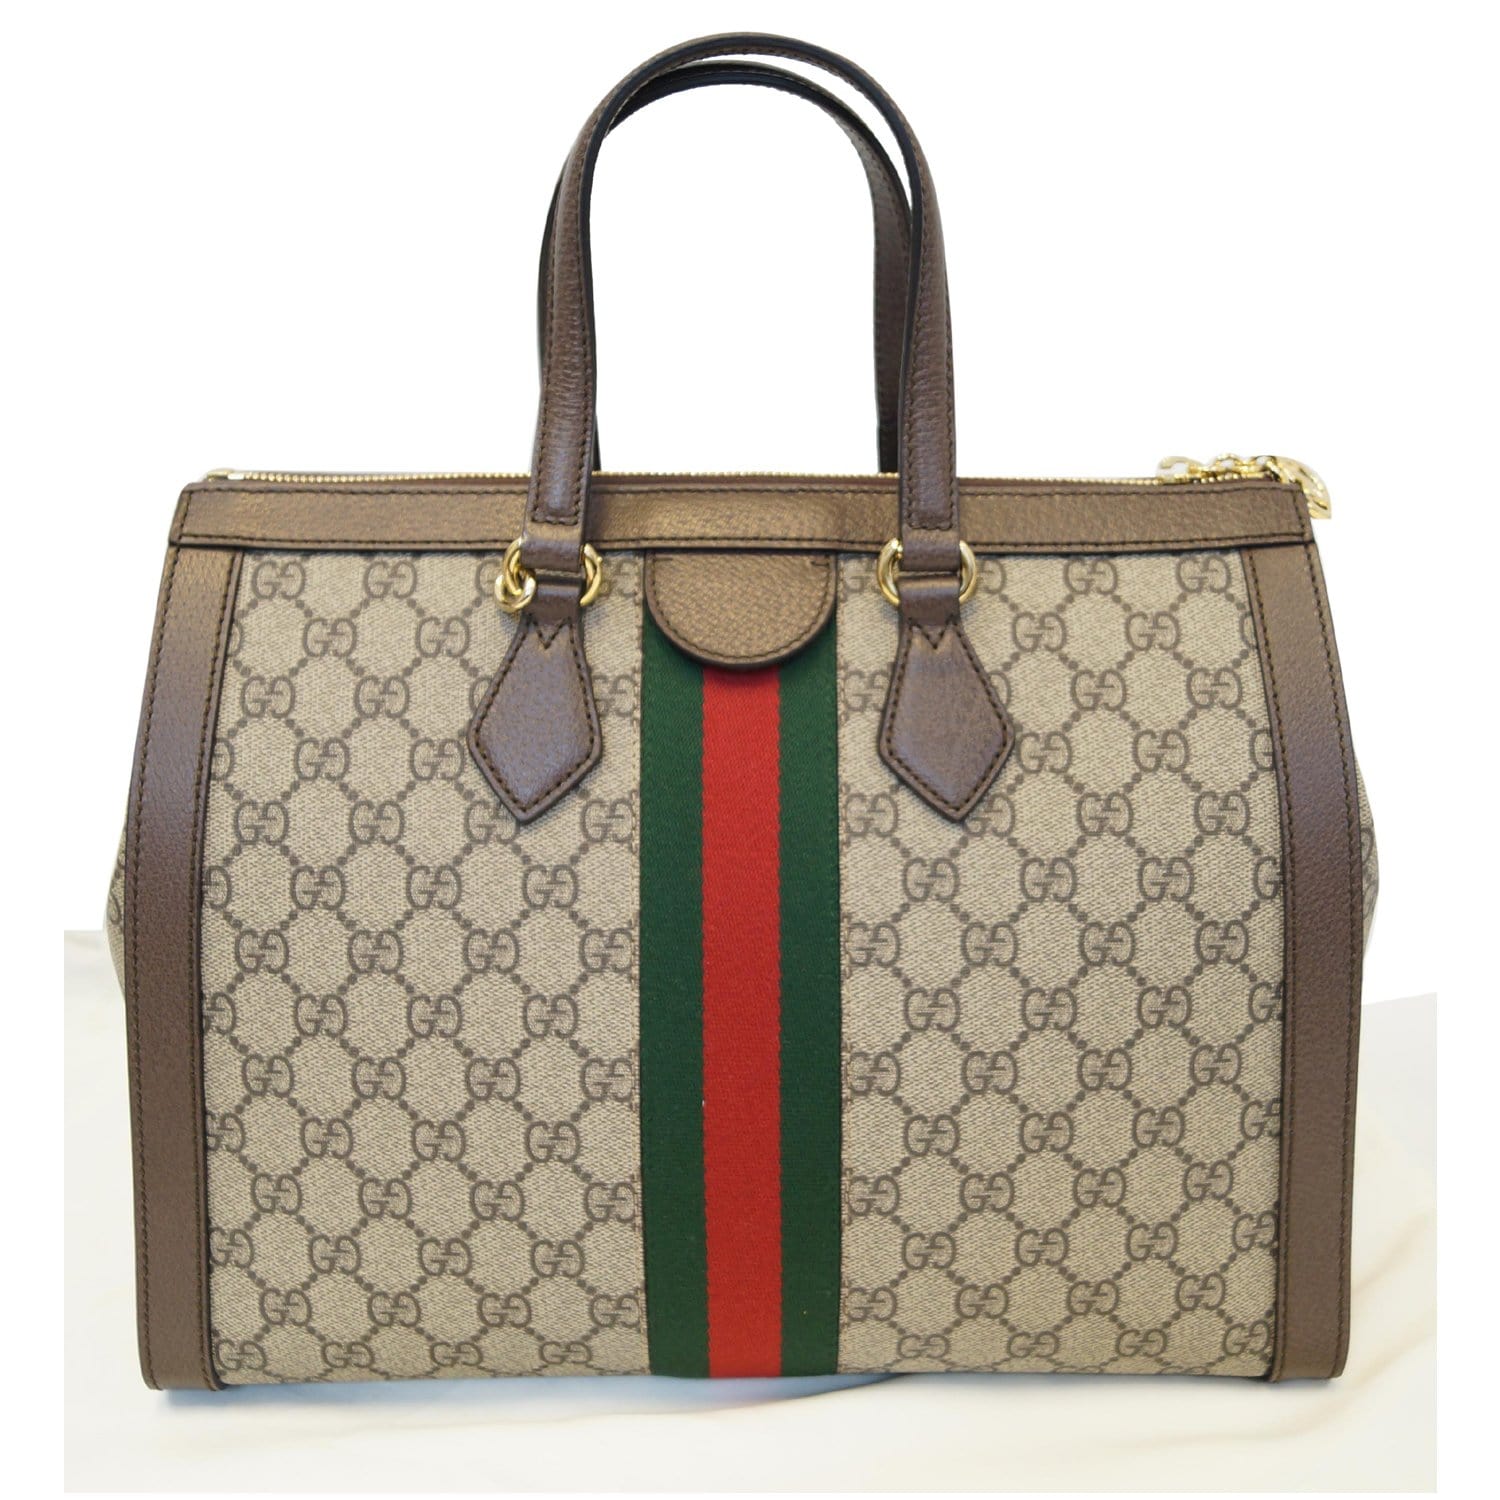 Gucci Ophidia Large Tote Bag, Beige, GG Canvas